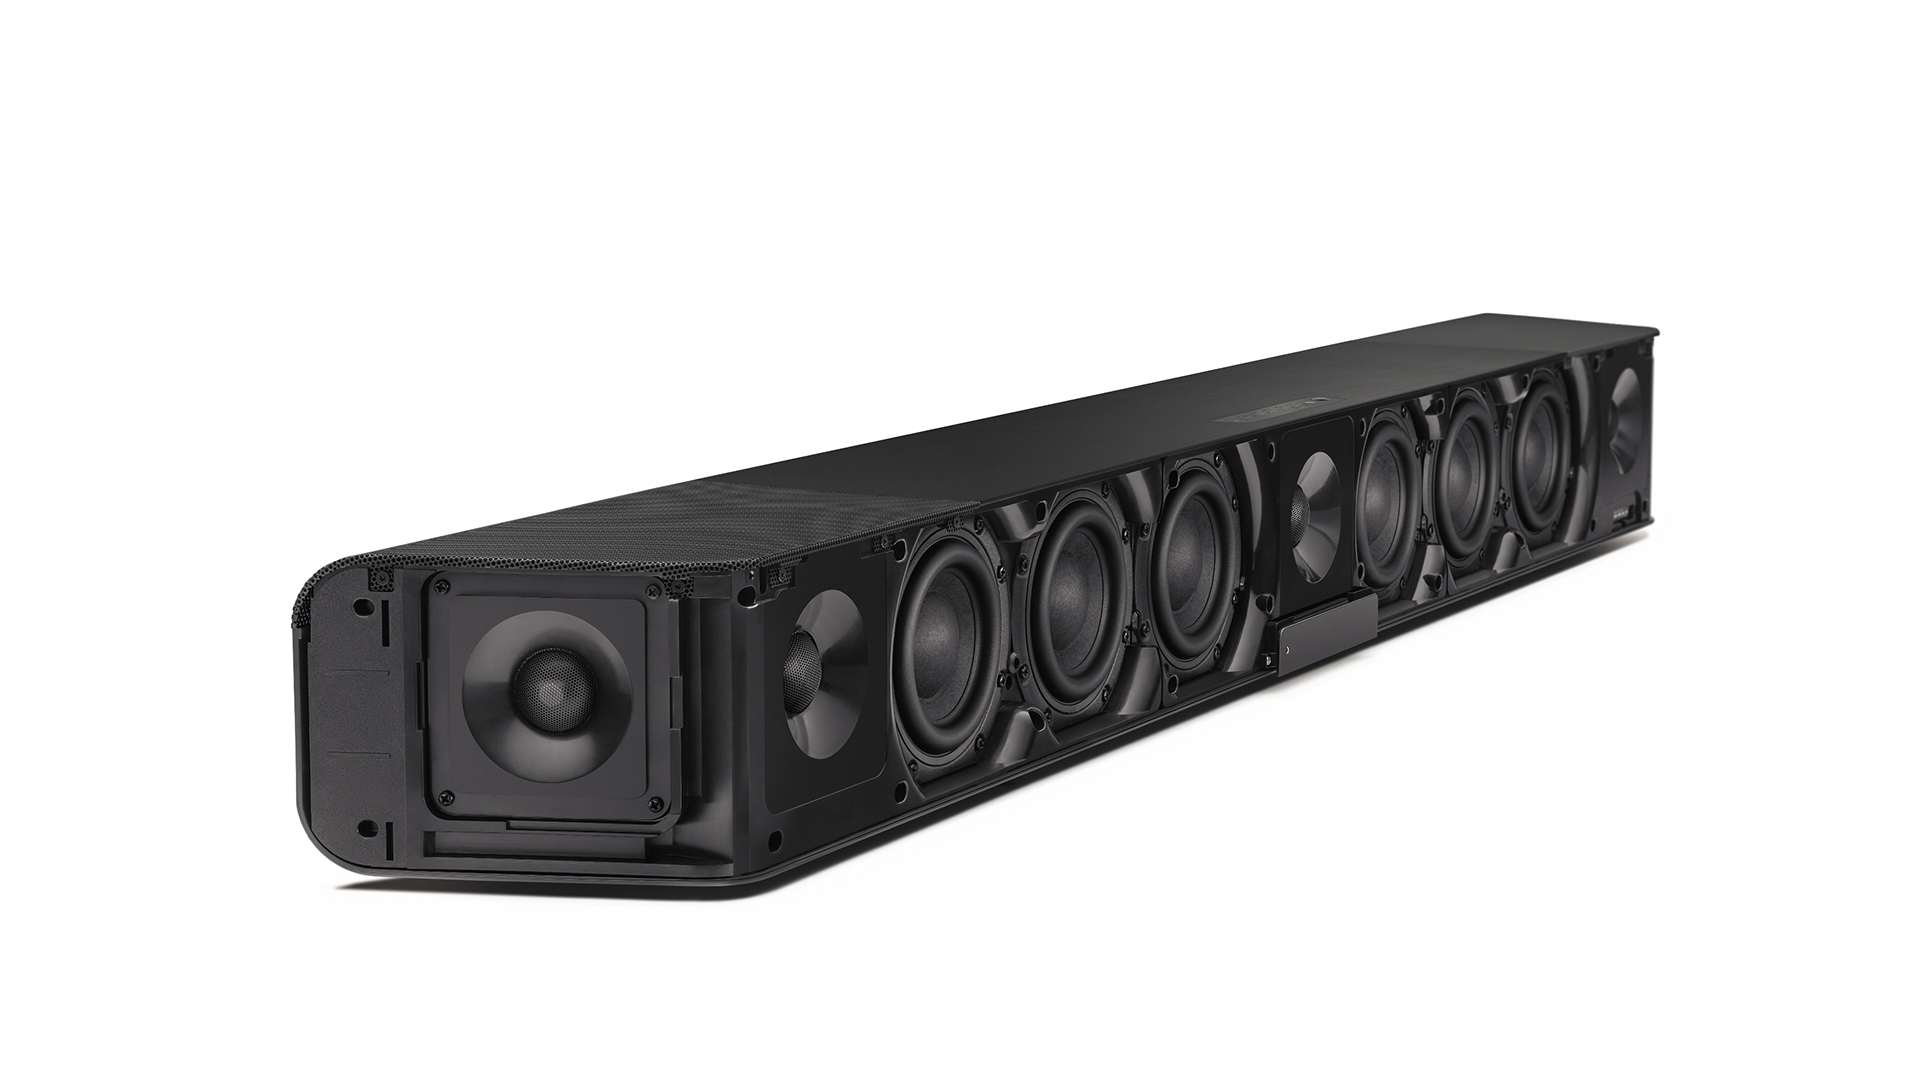 Pictured are the interal drivers of the Sennheiser Ambeo soundbar